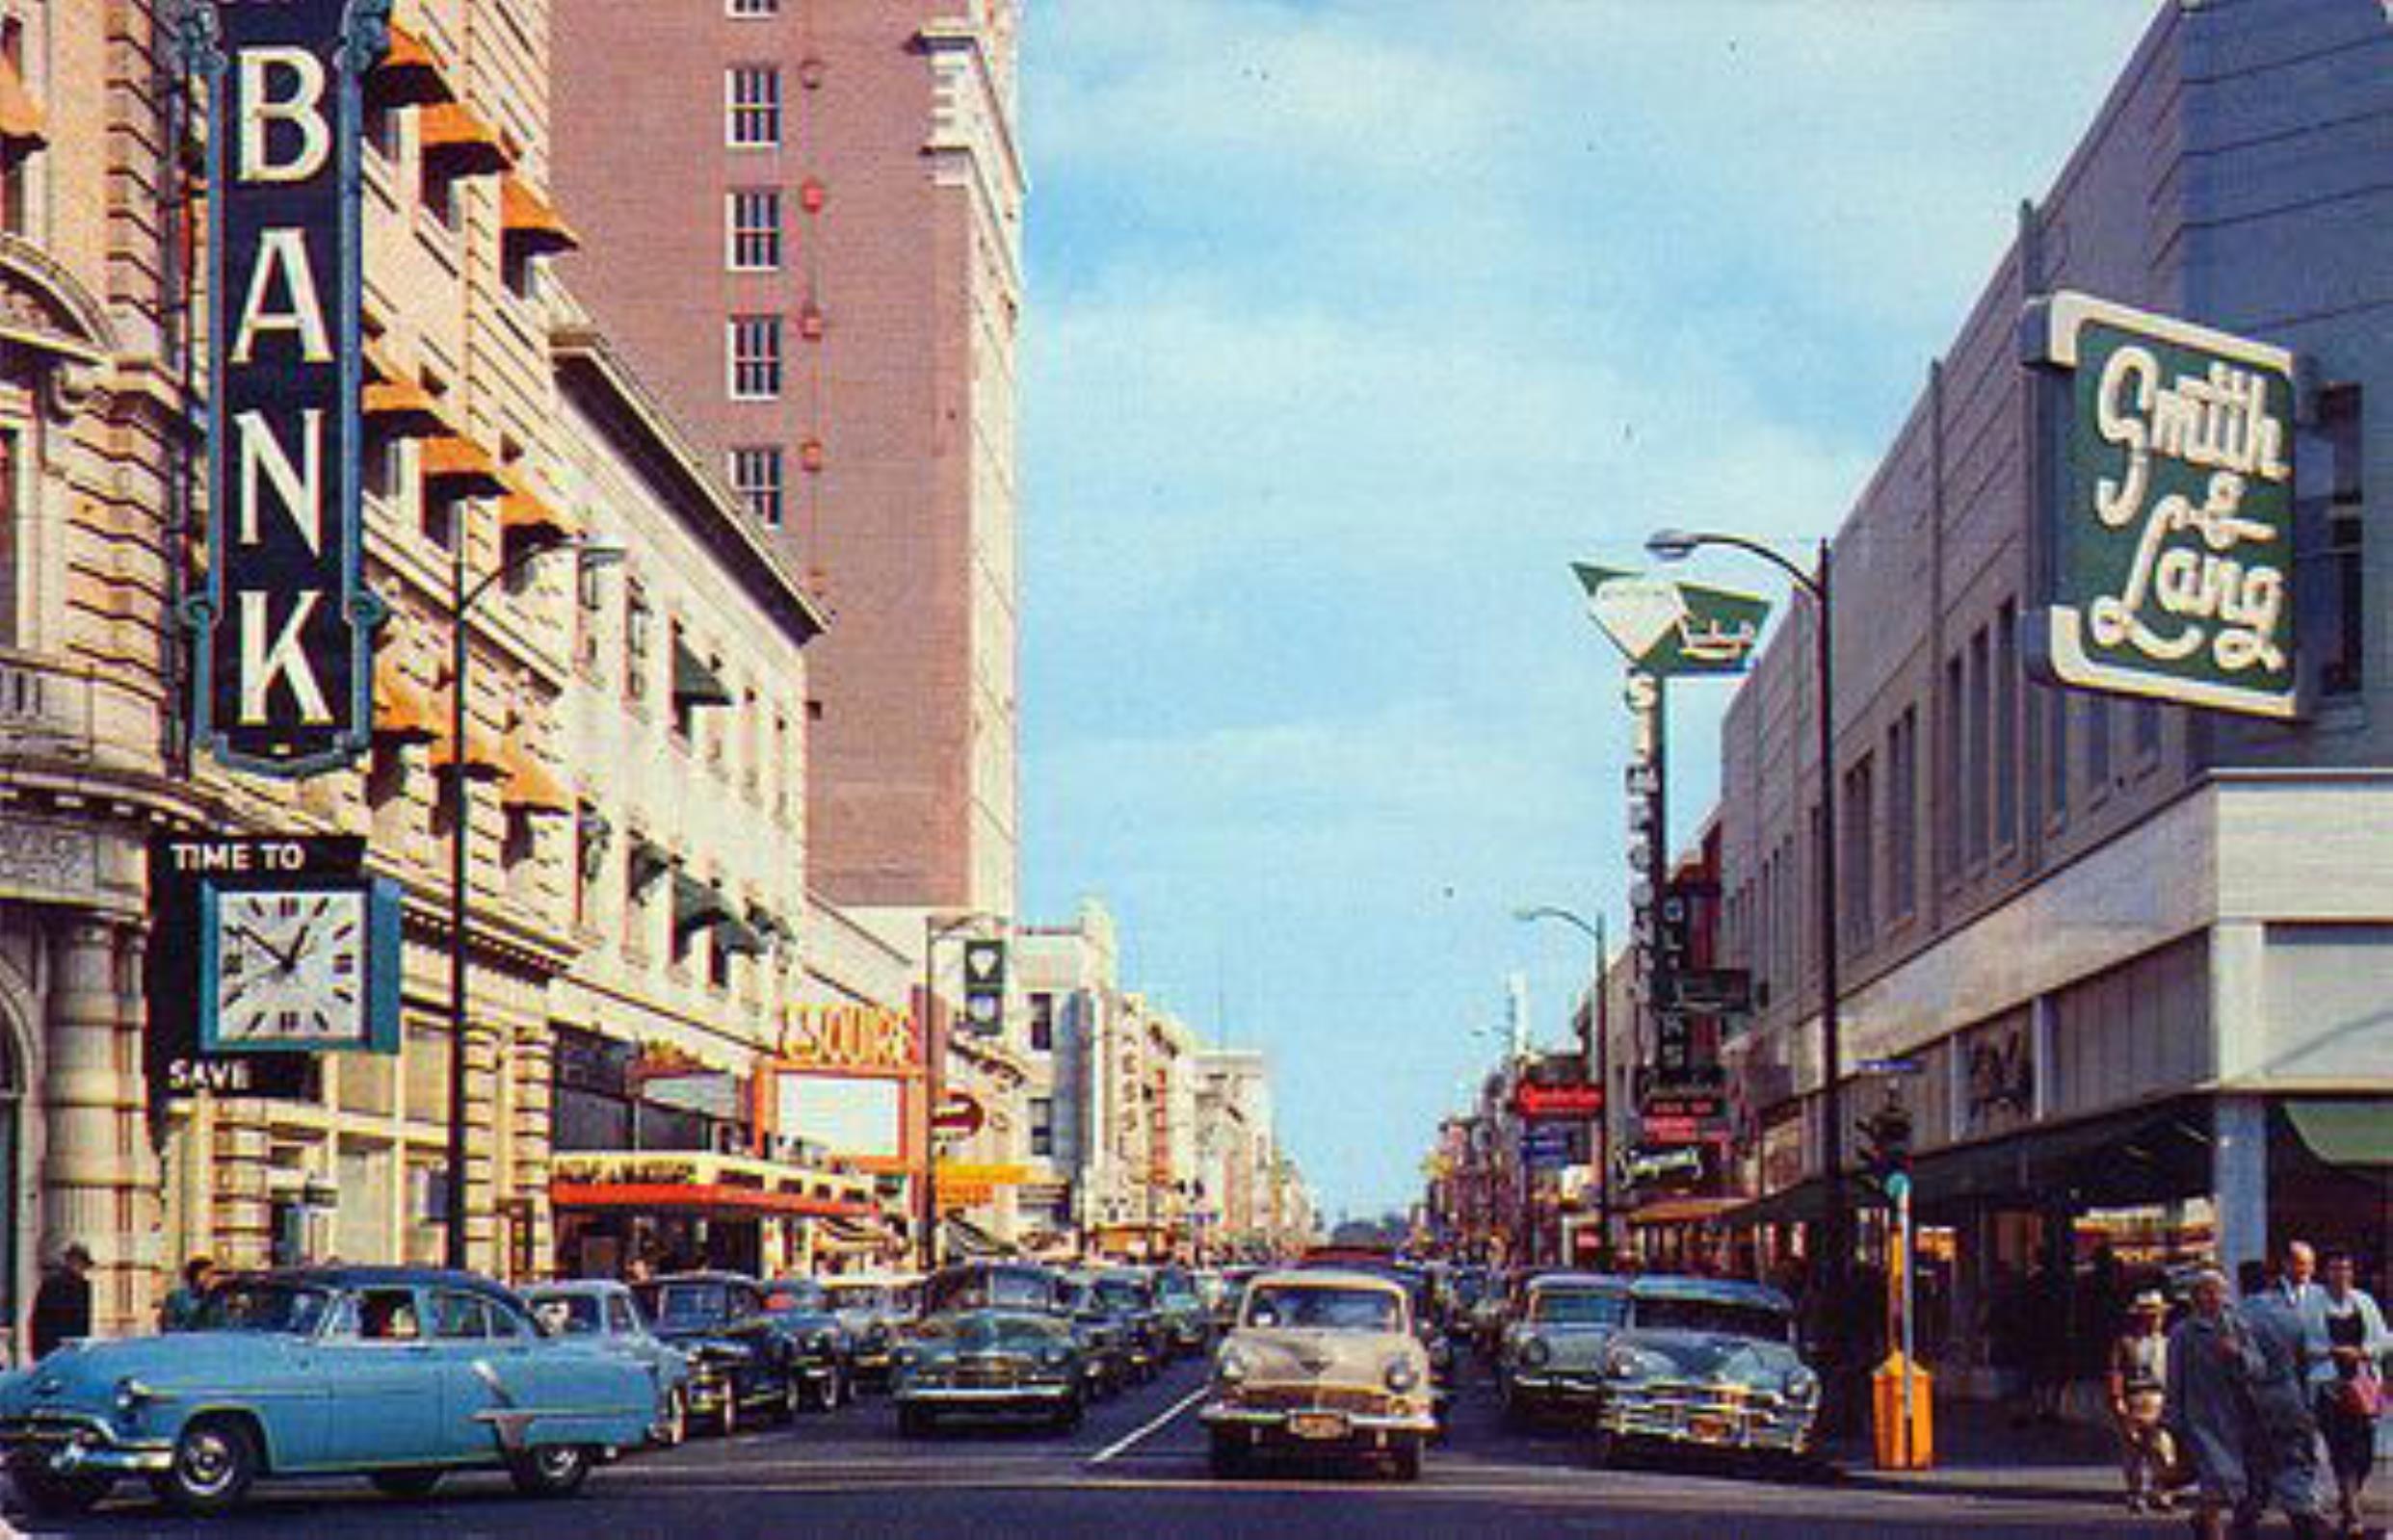 Downtown Stockton in the 1950’s